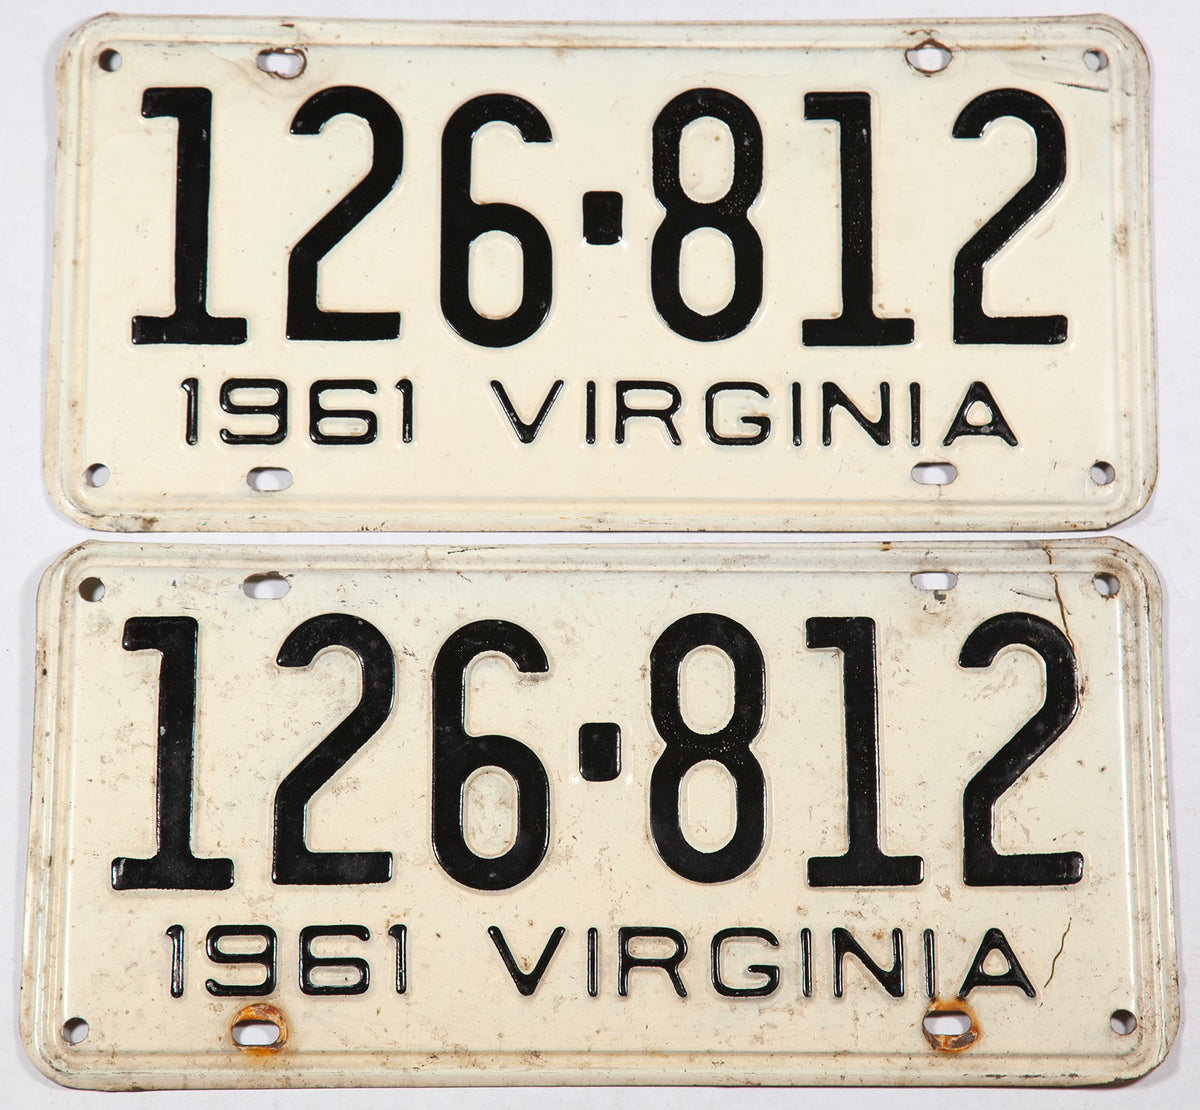 1961 Virginia license plates in very good minus condition